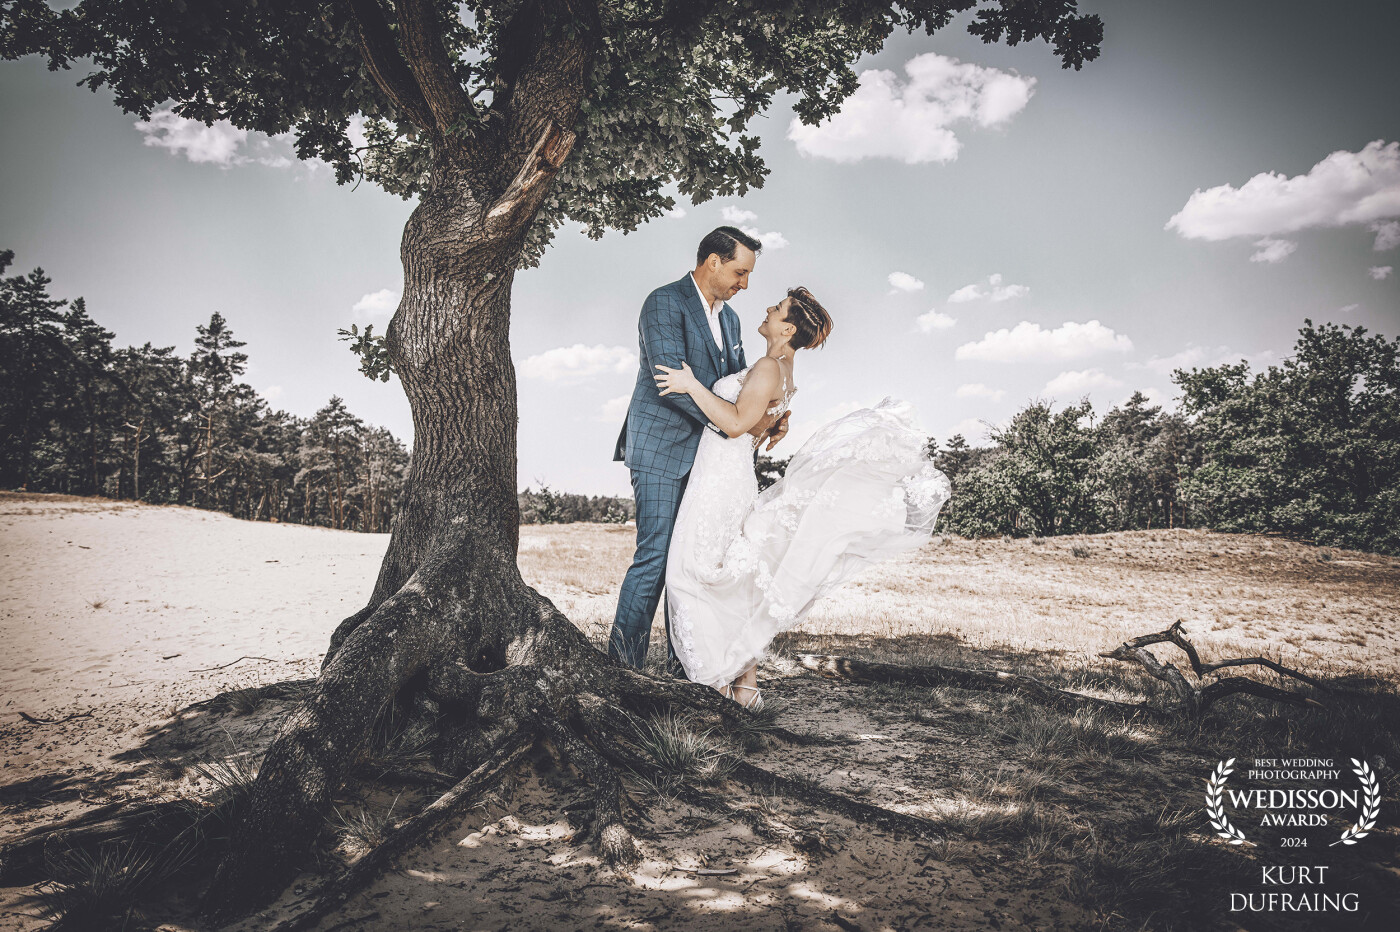 It was a scorching hot summer day and the location for the couples shoot offered little shade. Fortunately, there was still a single tree to be found on the sandy plain and a small breeze not only brought refreshment but also a nice movement to the bride's dress.